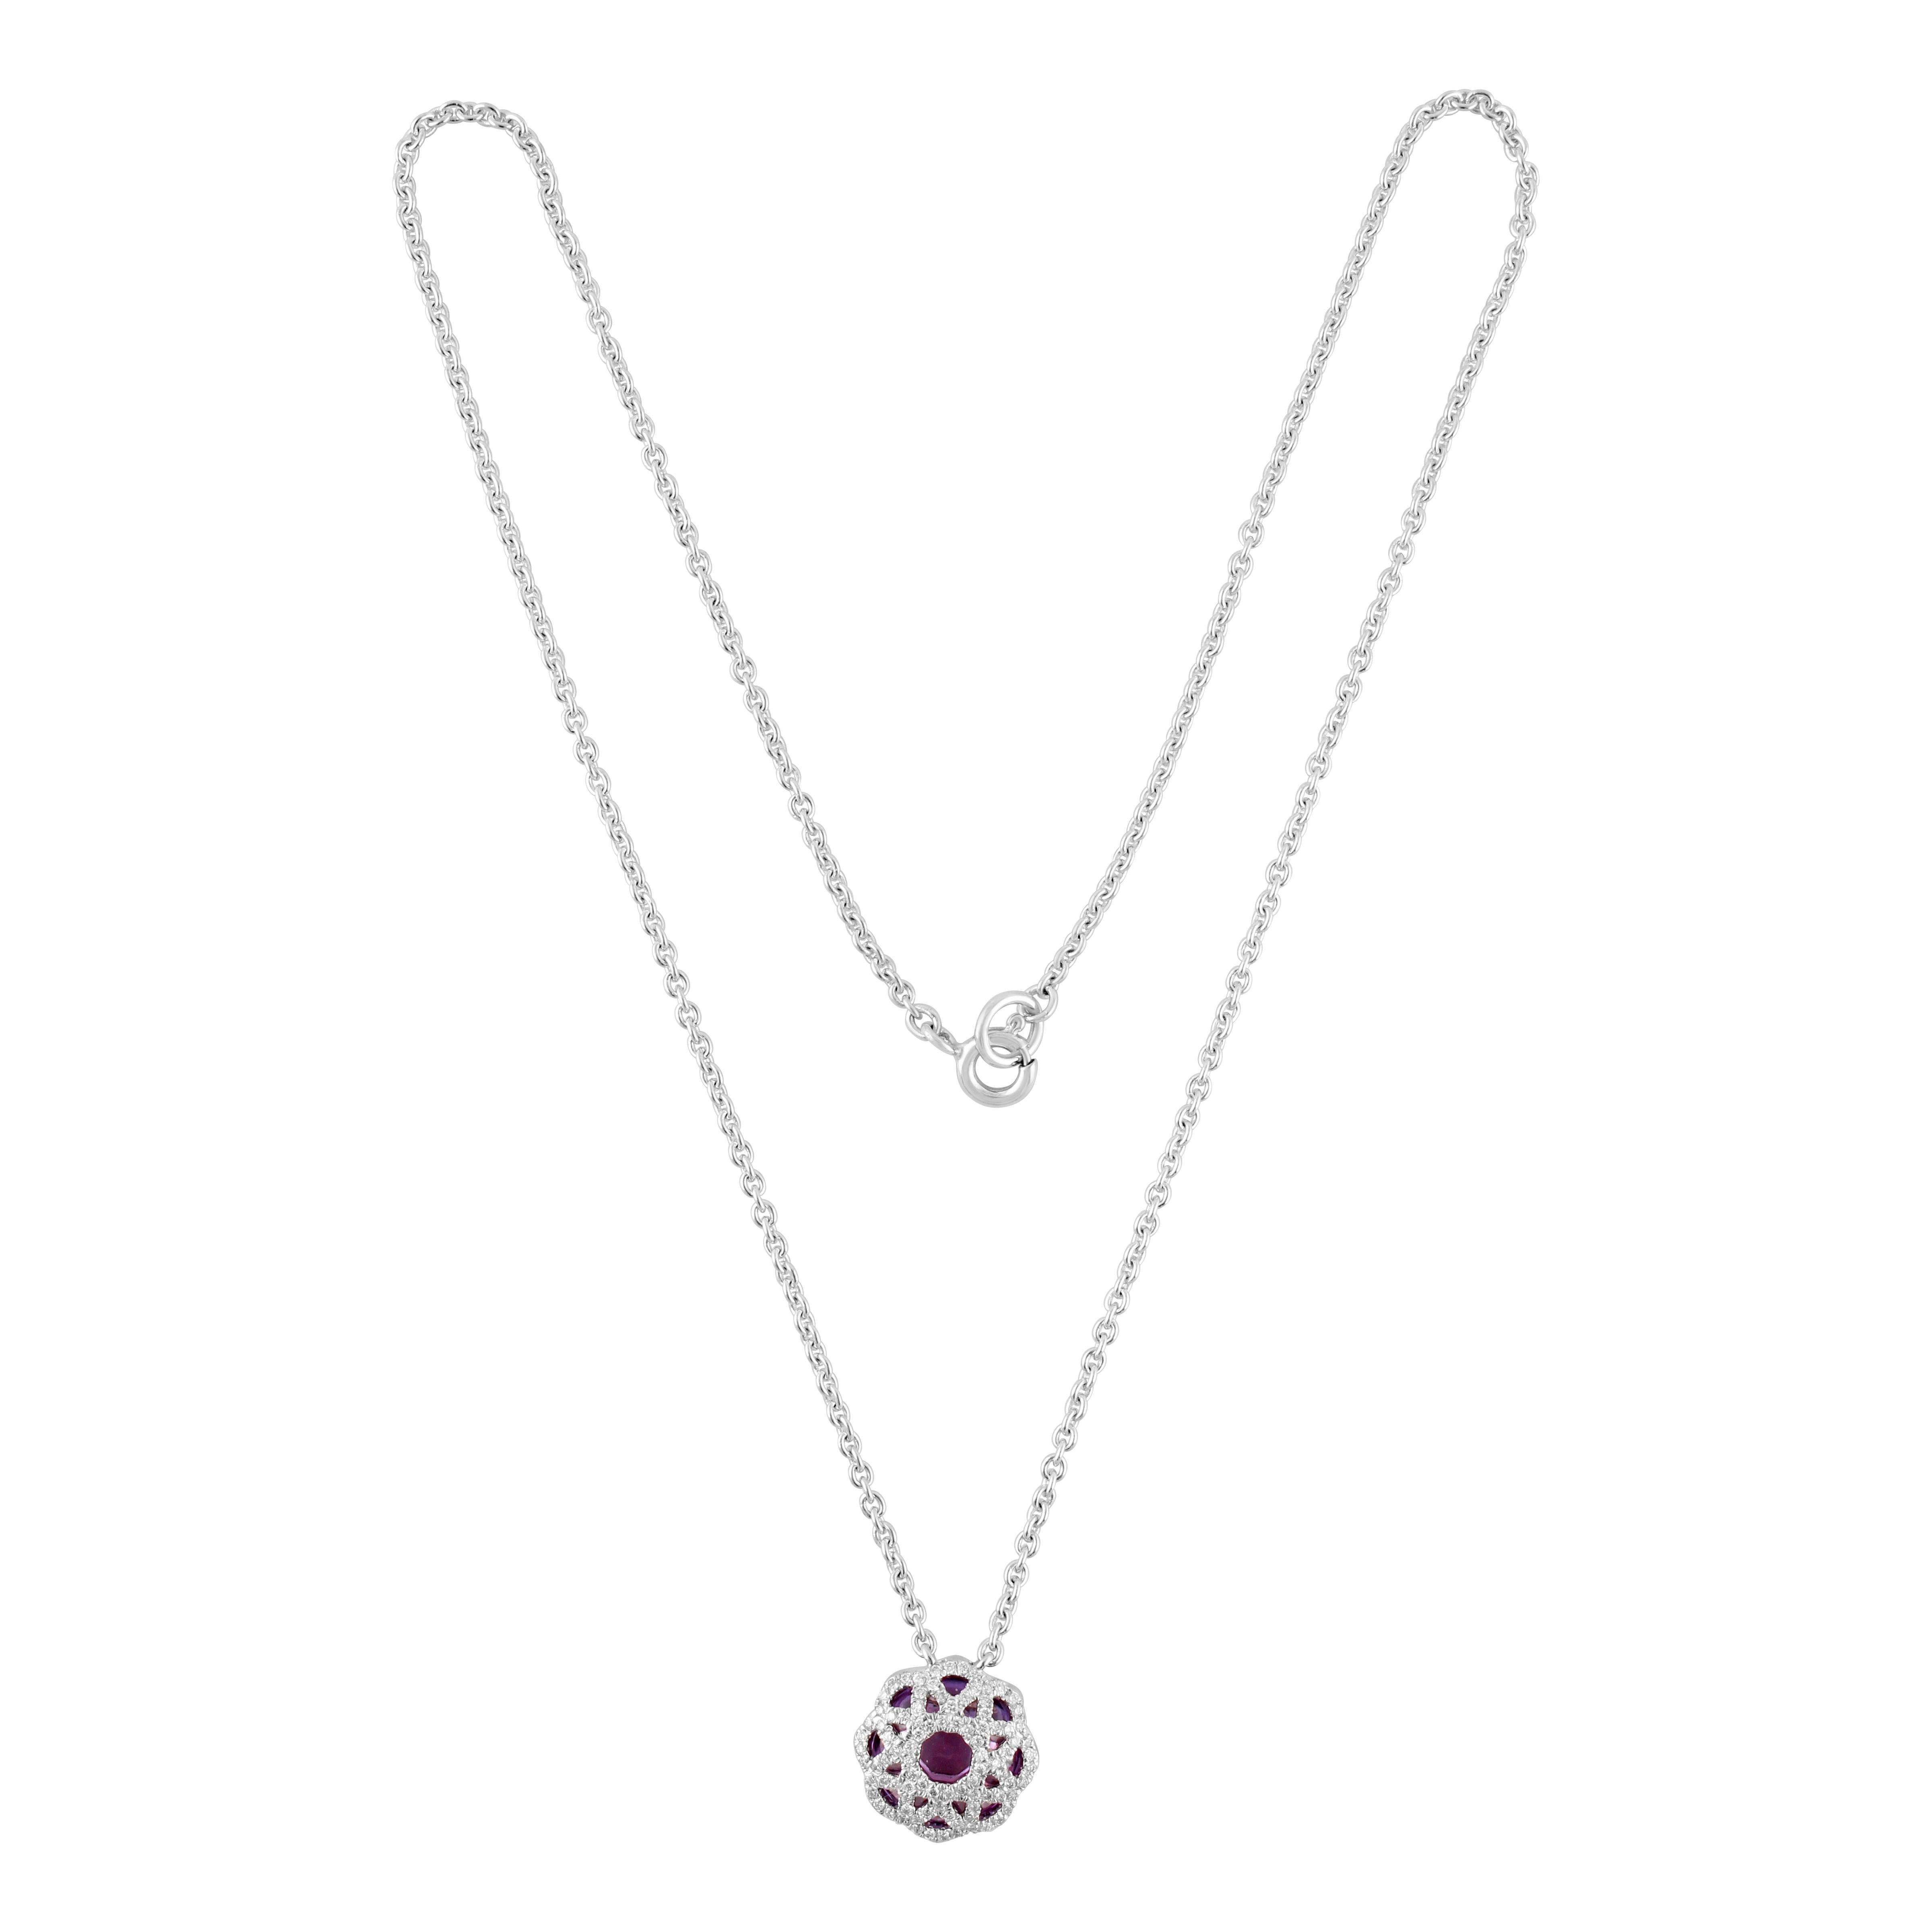 Amethyst and Diamond Cave Pendant Necklace, Set in 18 Karat White Gold
Amethyst - 3.60 Carat 
Round Diamonds 0.27 carats
18kt White Gold 
